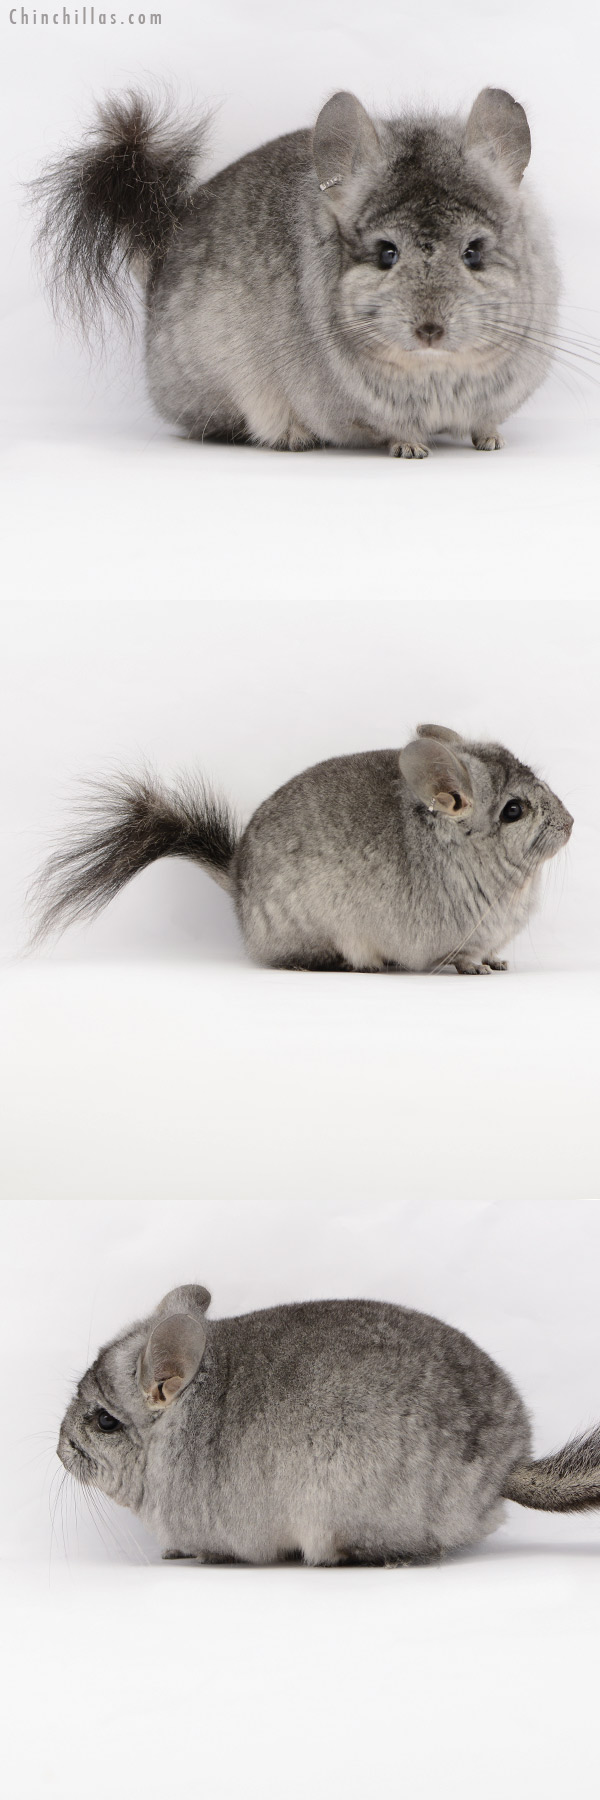 Chinchilla or related item offered for sale or export on Chinchillas.com - 20186 Standard ( Ebony & Locken Carrier )  Royal Persian Angora Male Chinchilla